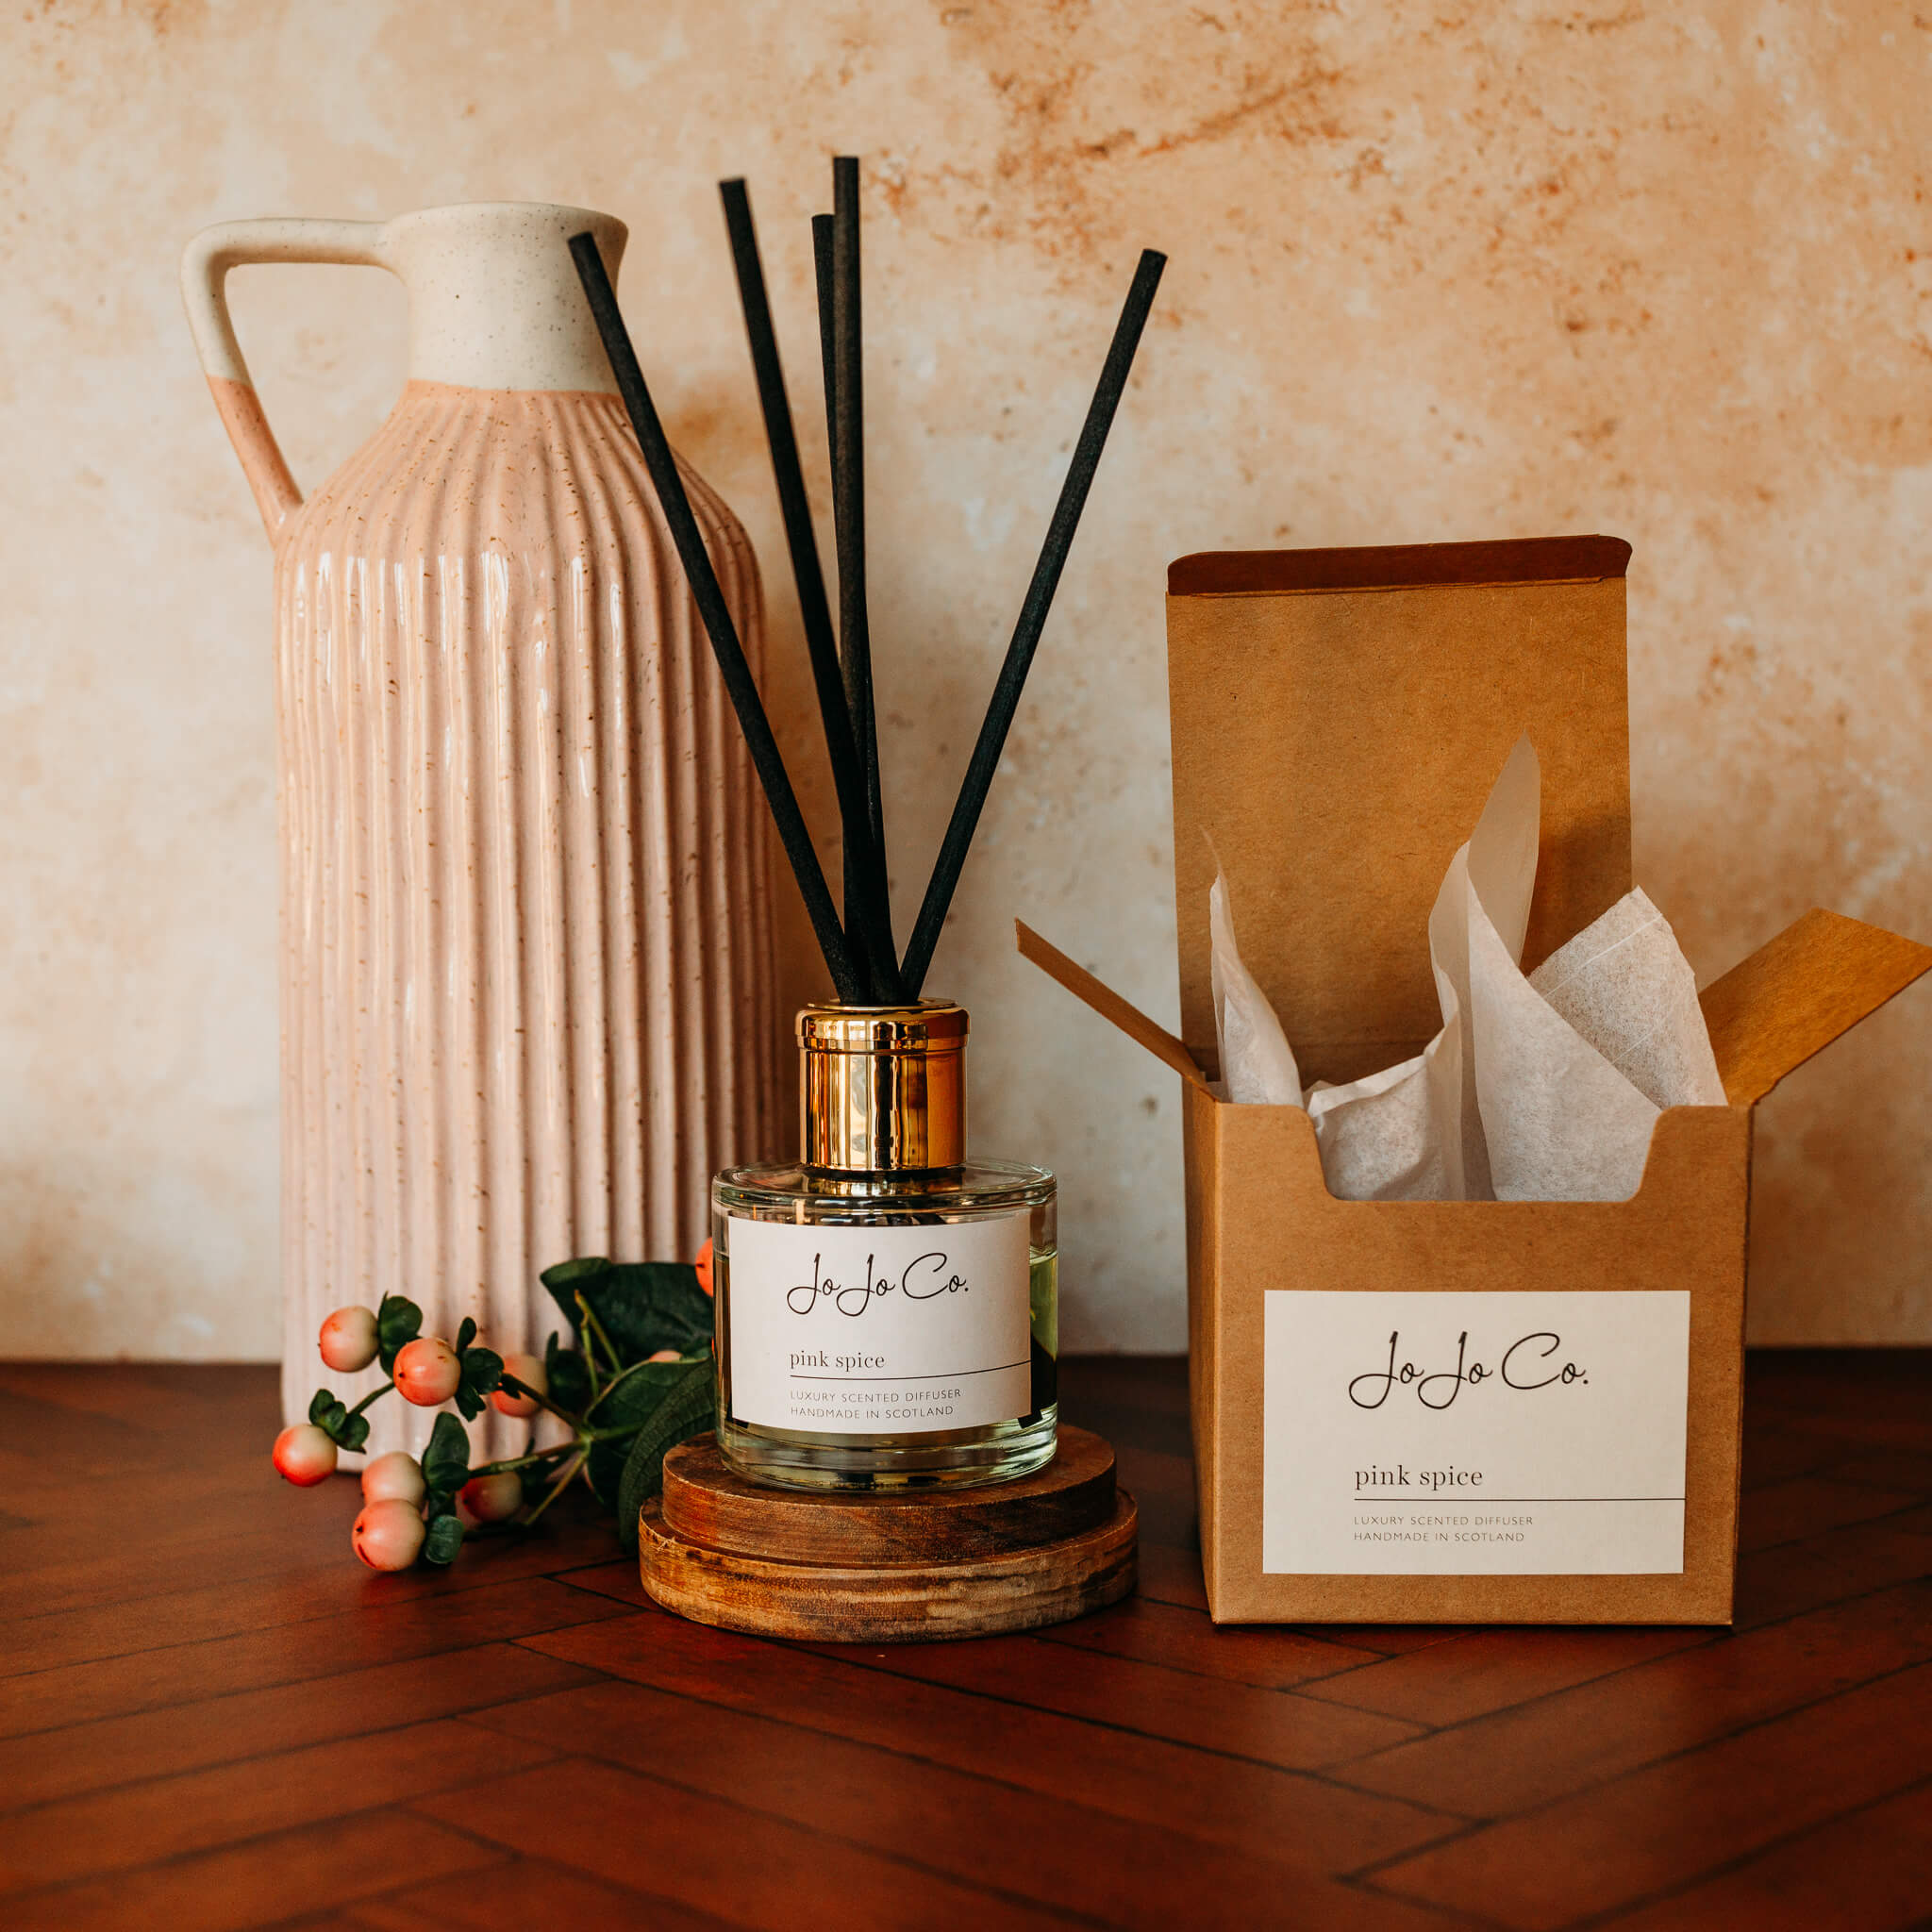 A glass jar diffuser with cream JoJo Co label, gold lid and black reeds sit on an oak candle base on a wooden floor. In the background is a pink and cream jug and pink blush berries on green stalks. 